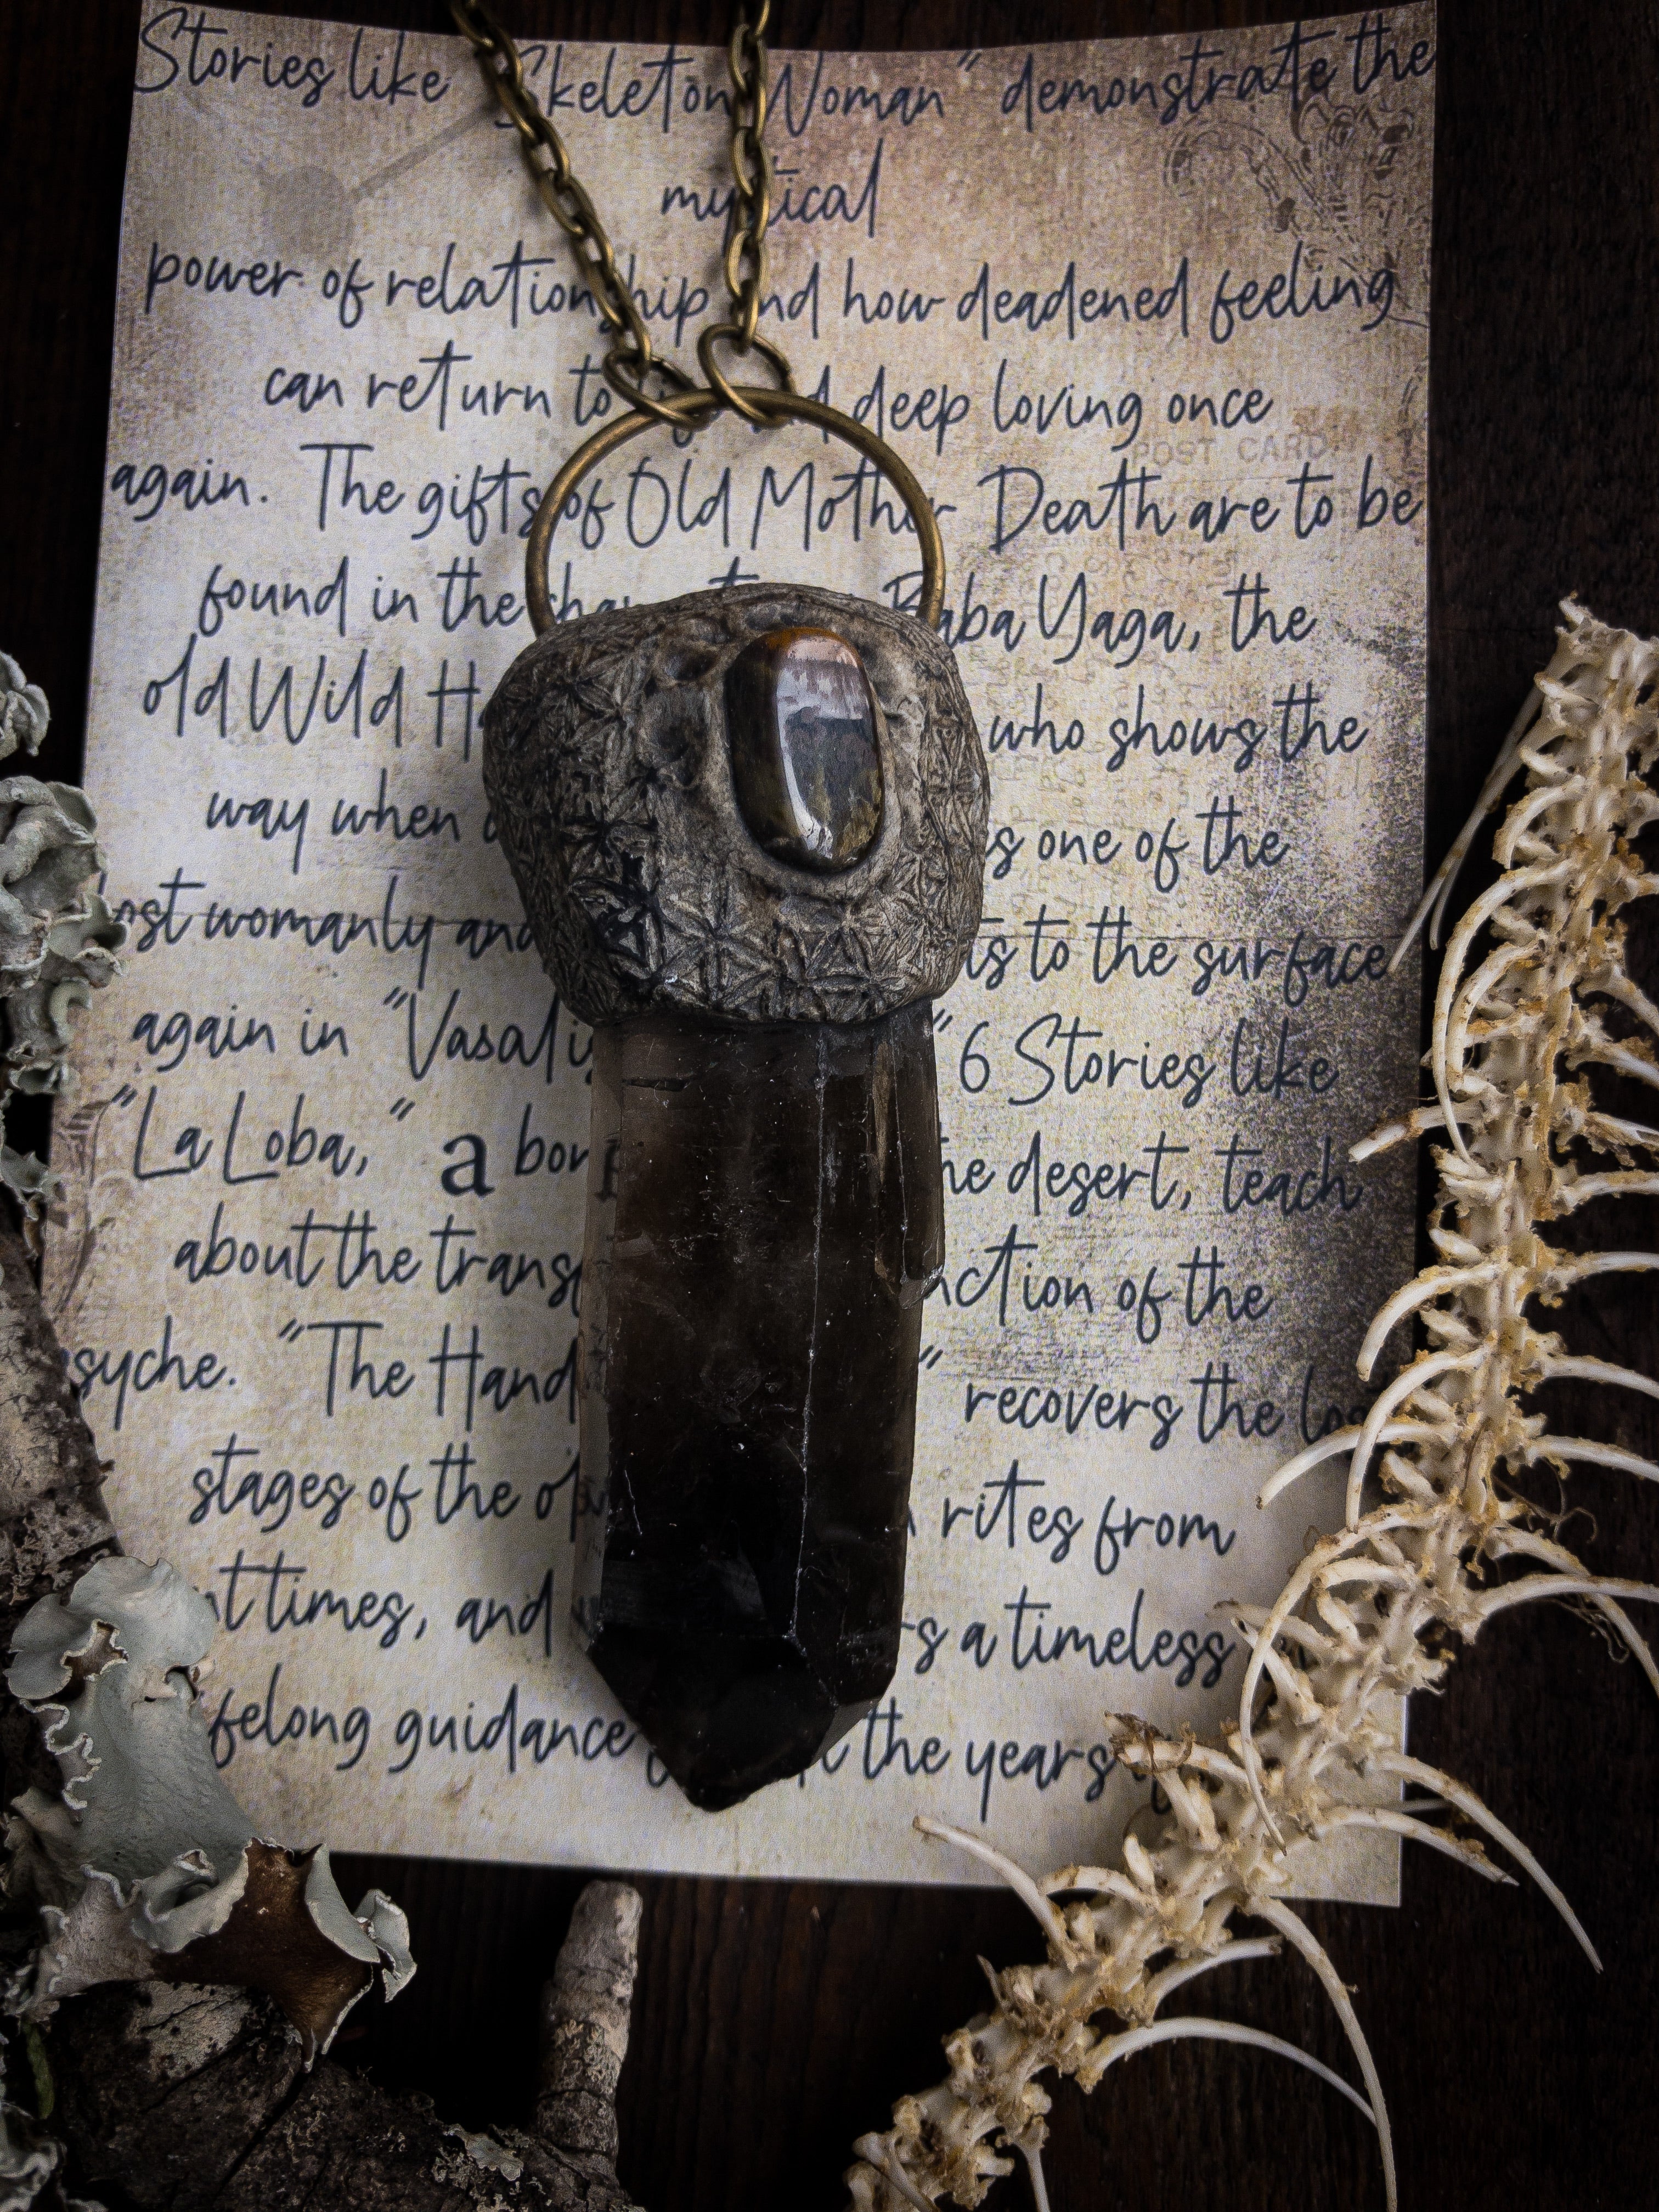 Creative Consciousness Necklace with Smoky Quartz and Tigers Eye for Spiritual Connection, Creativity and Growth